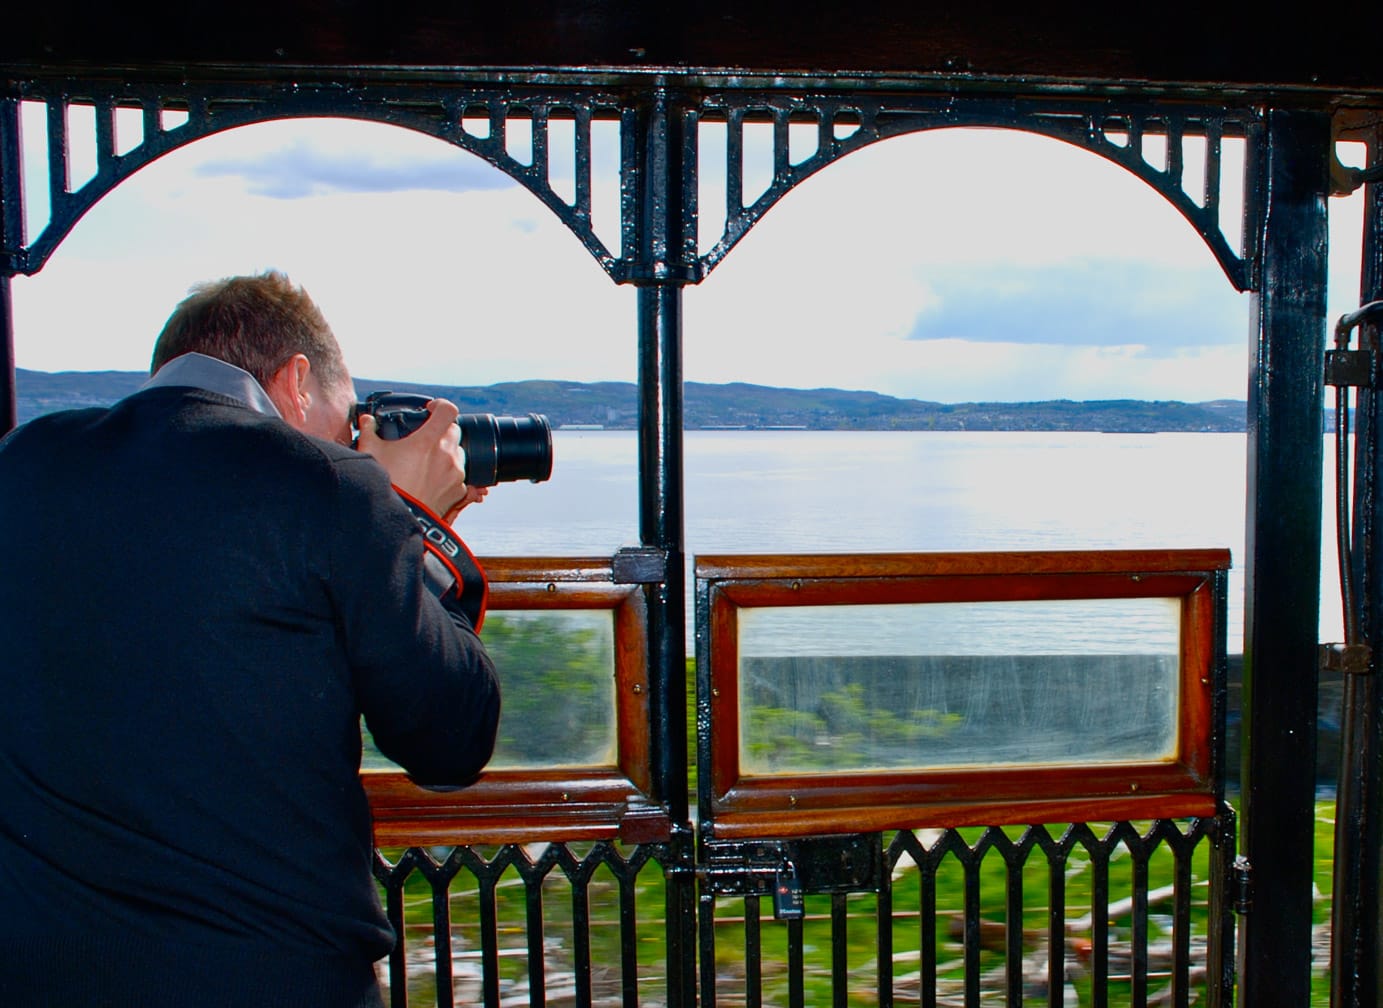 Man photographing ocean views while on the Western Scenic Wonders journey